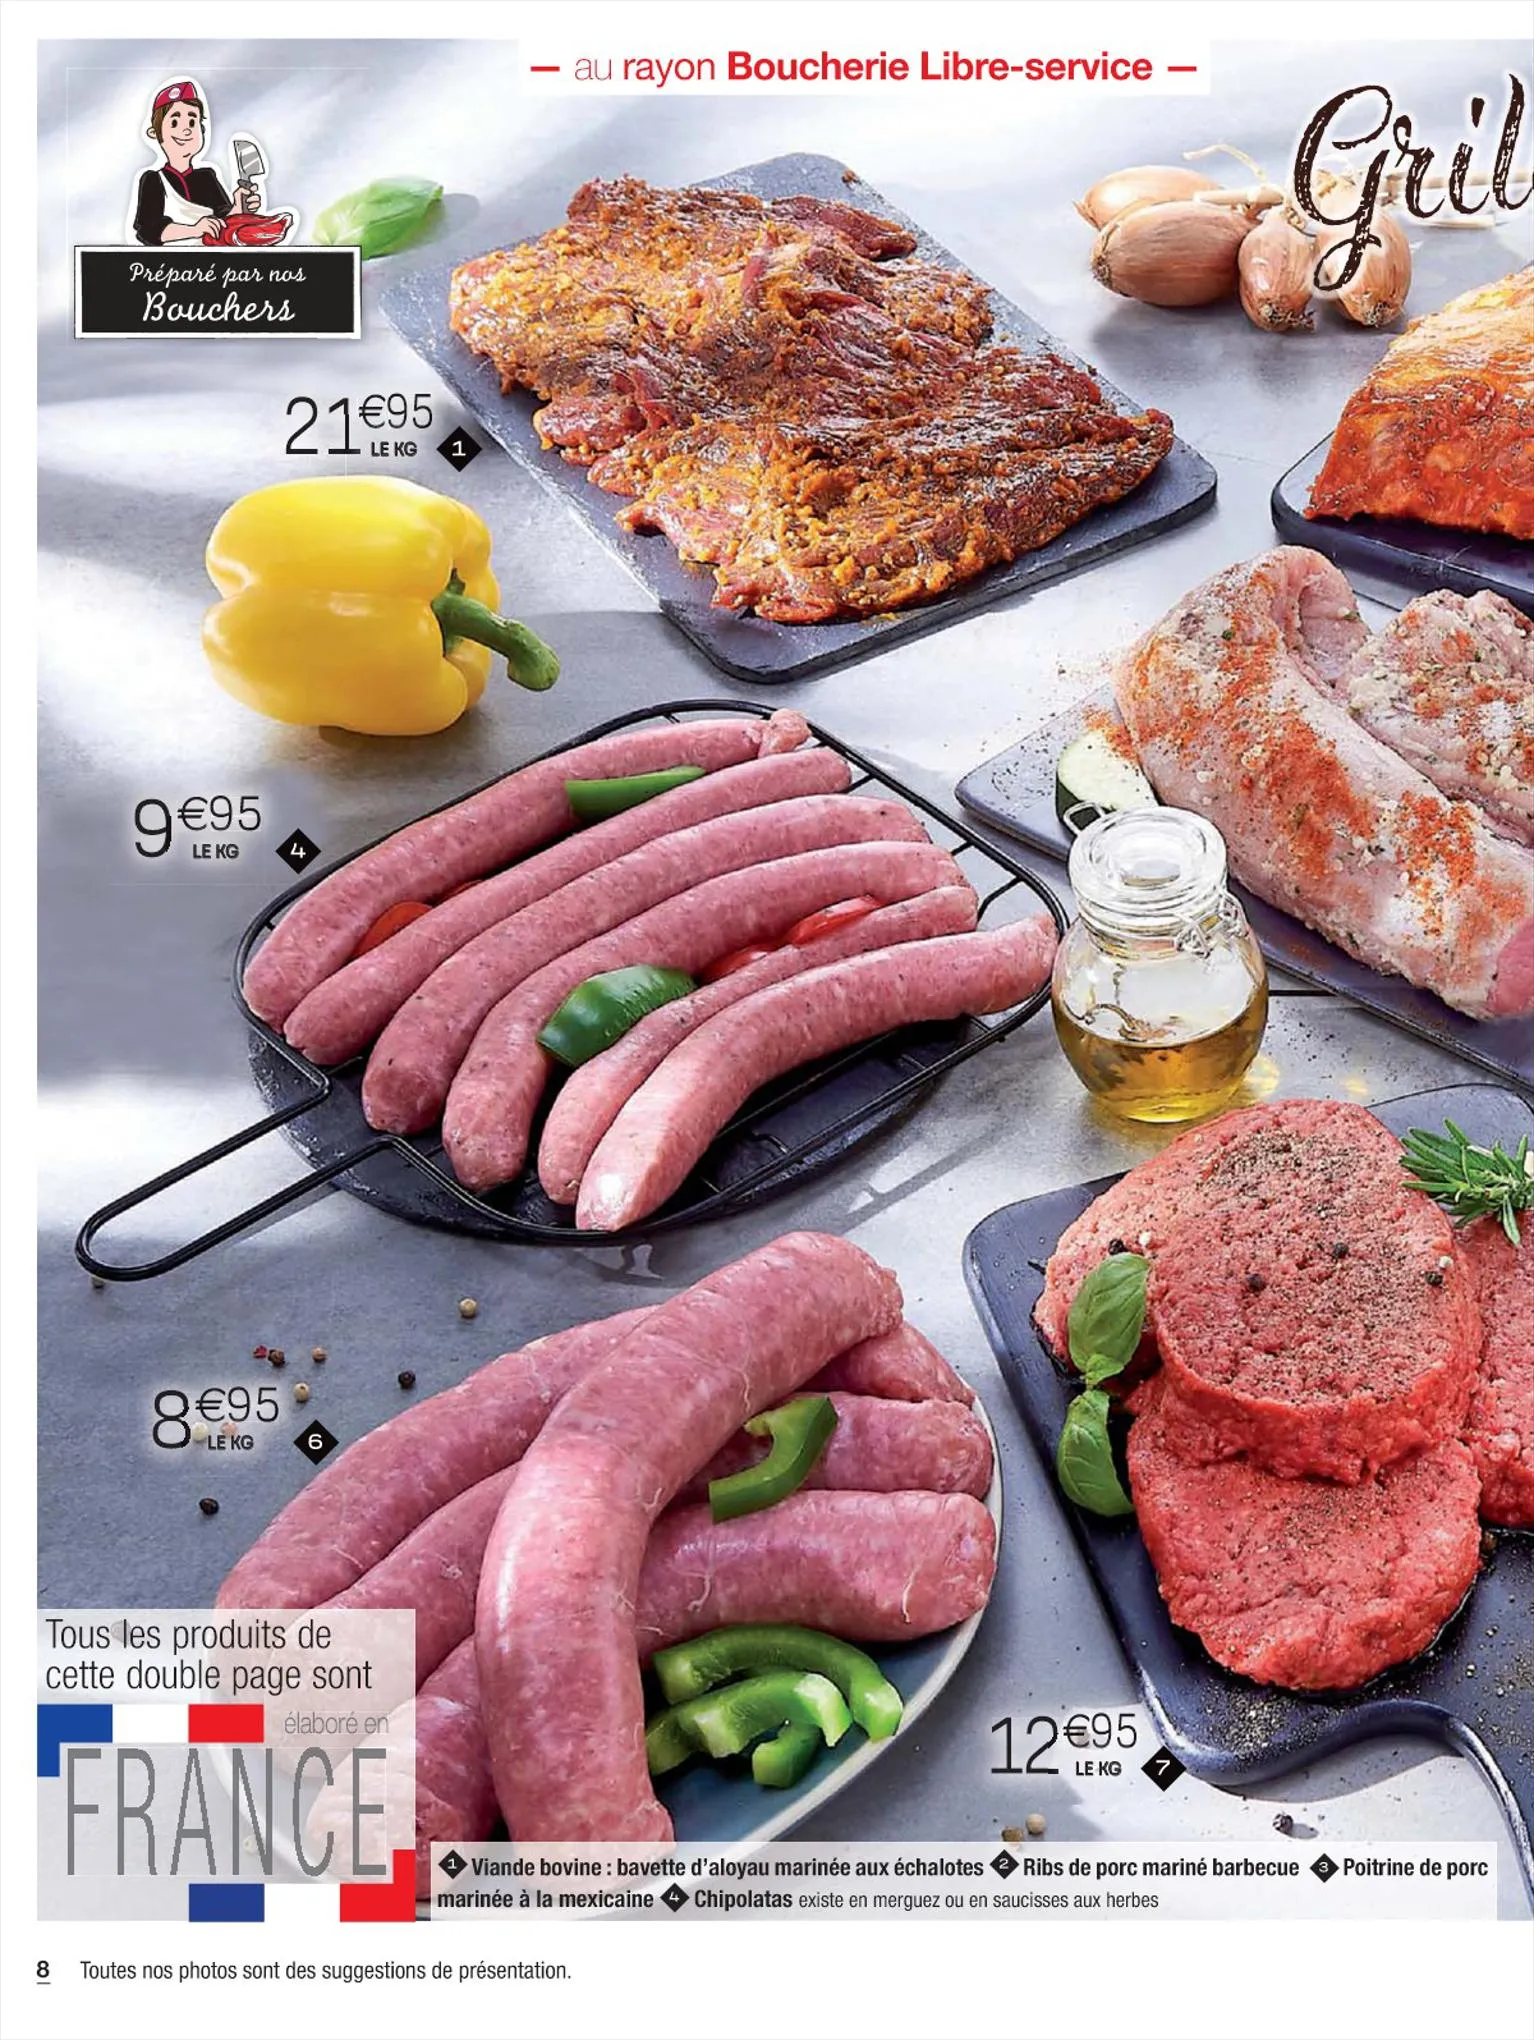 Catalogue Spécial Barbecue, page 00008